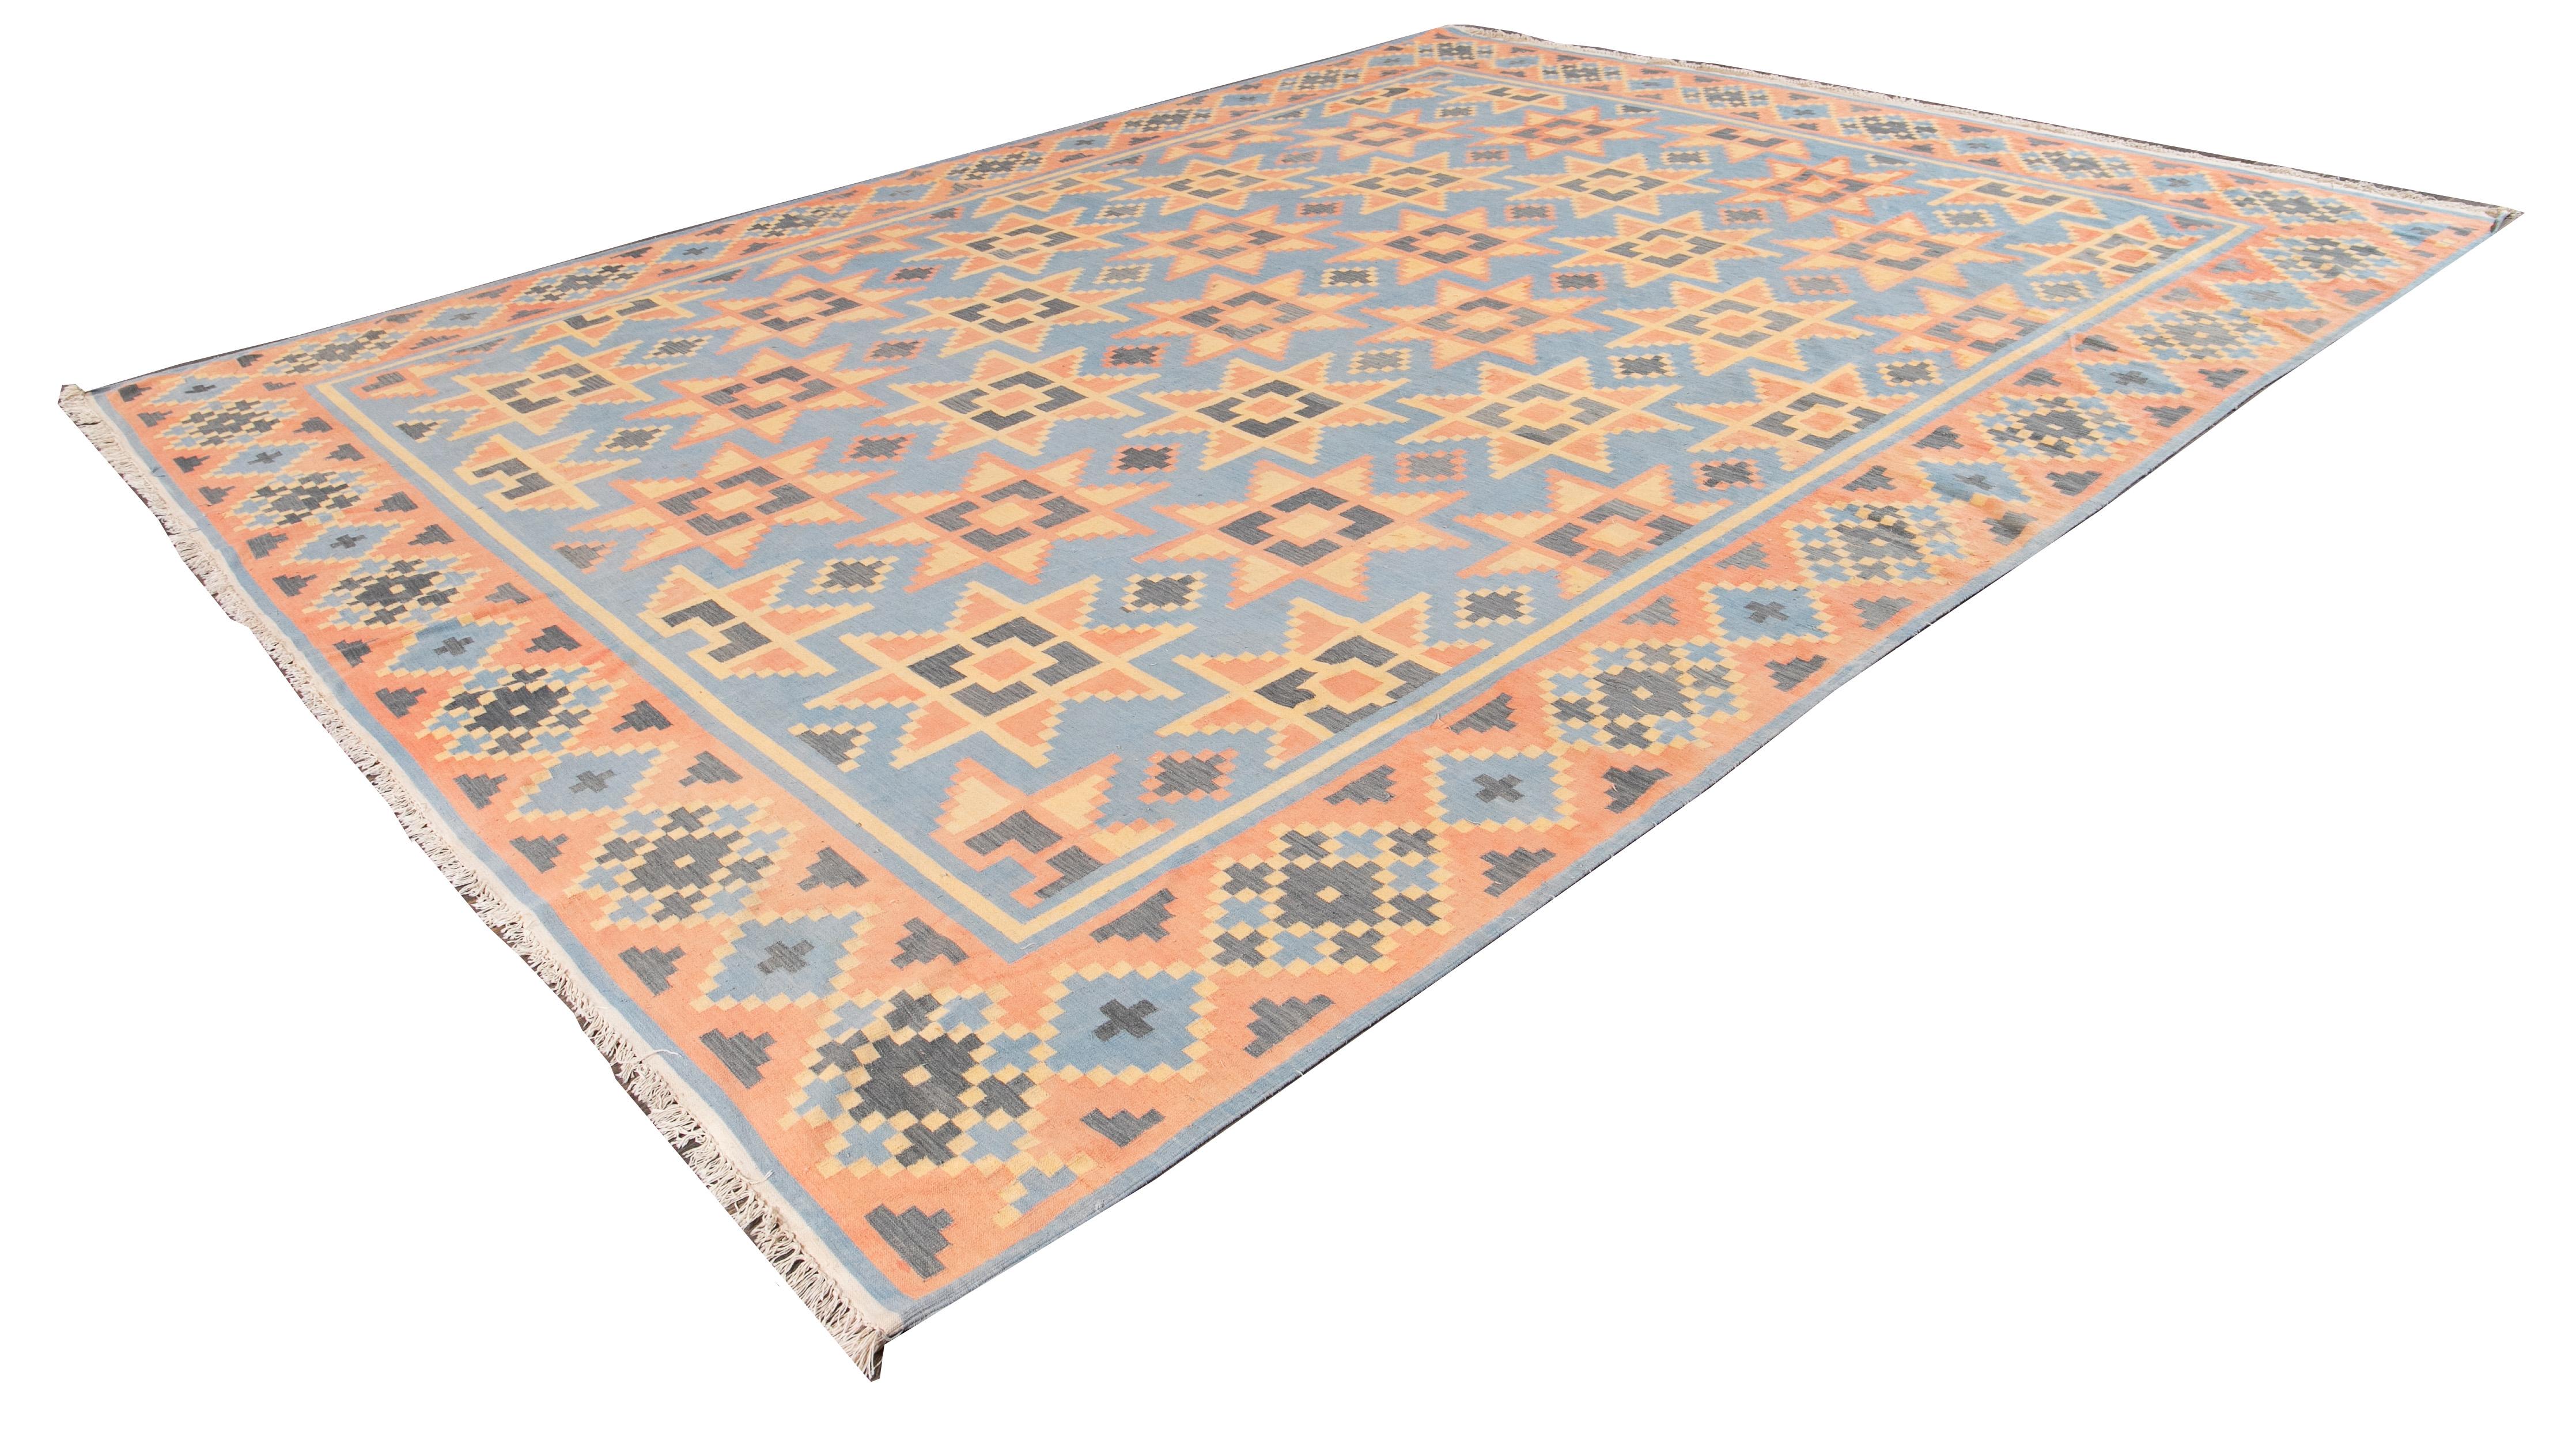 Vintage Cotton  Dhurrie Kilim Art Deco rug with a blue field and orange and grey accents with an all-over geometric design. 

This rug measures 11' 9